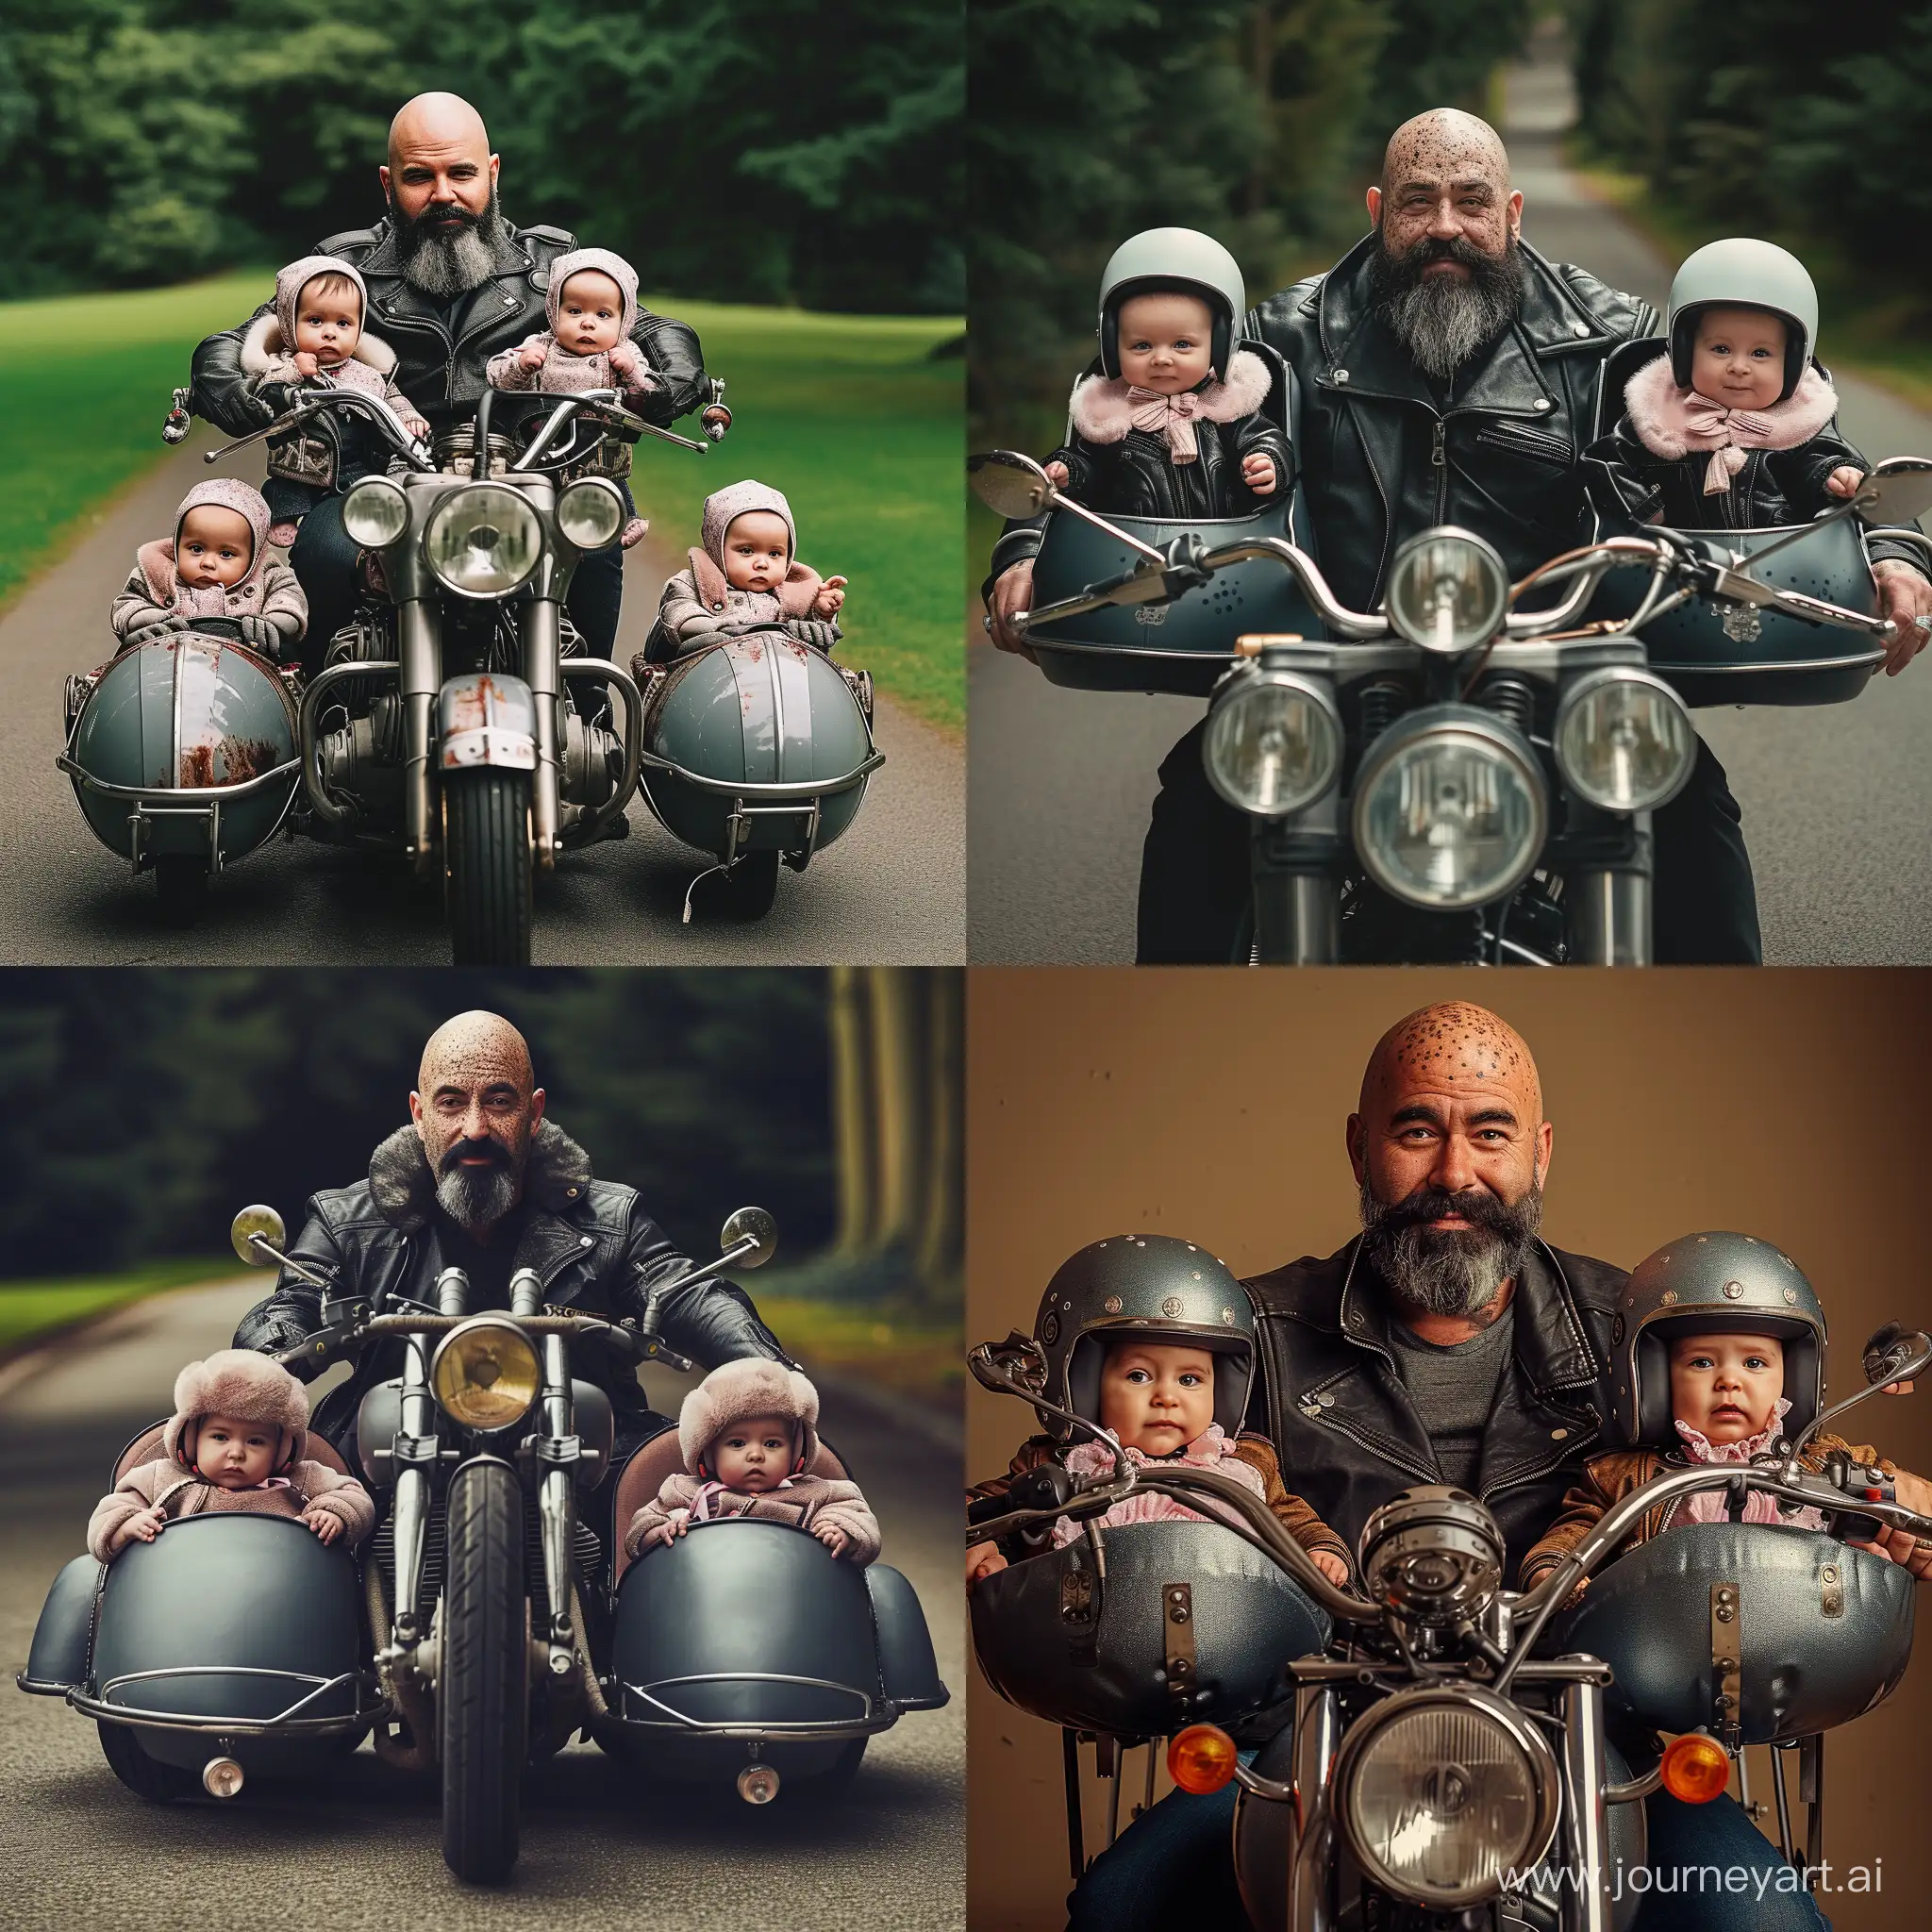 A father who is bald with a black beard but speckled grey, and he's driving a cool motorcycle that has two side cars one on each side.  In each side car is an infant twins baby girl, and the girls are wearing leather jackets and helmets